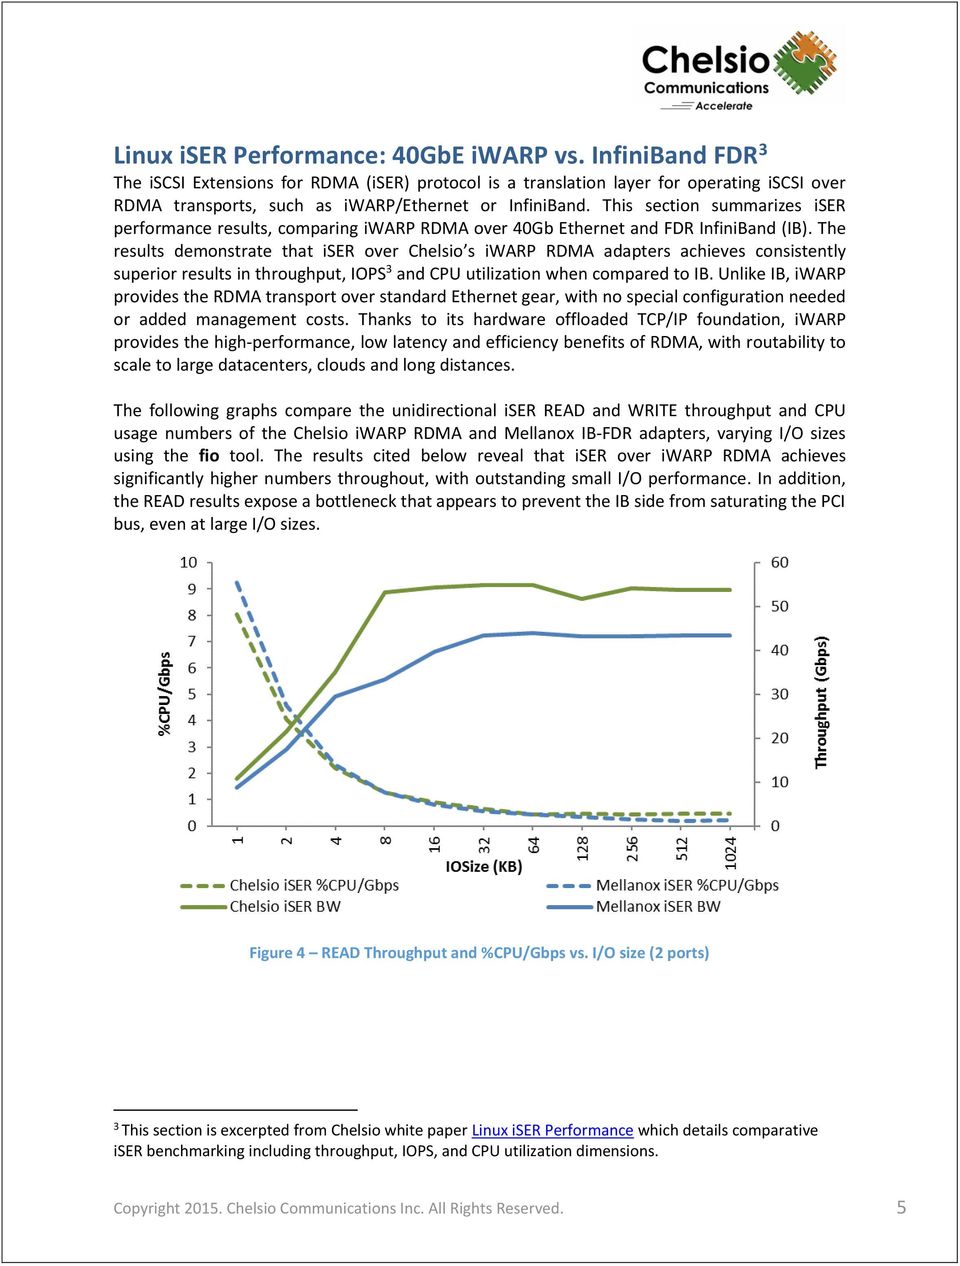 This section summarizes iser performance results, comparing iwarp RDMA over 40Gb Ethernet and FDR InfiniBand (IB).